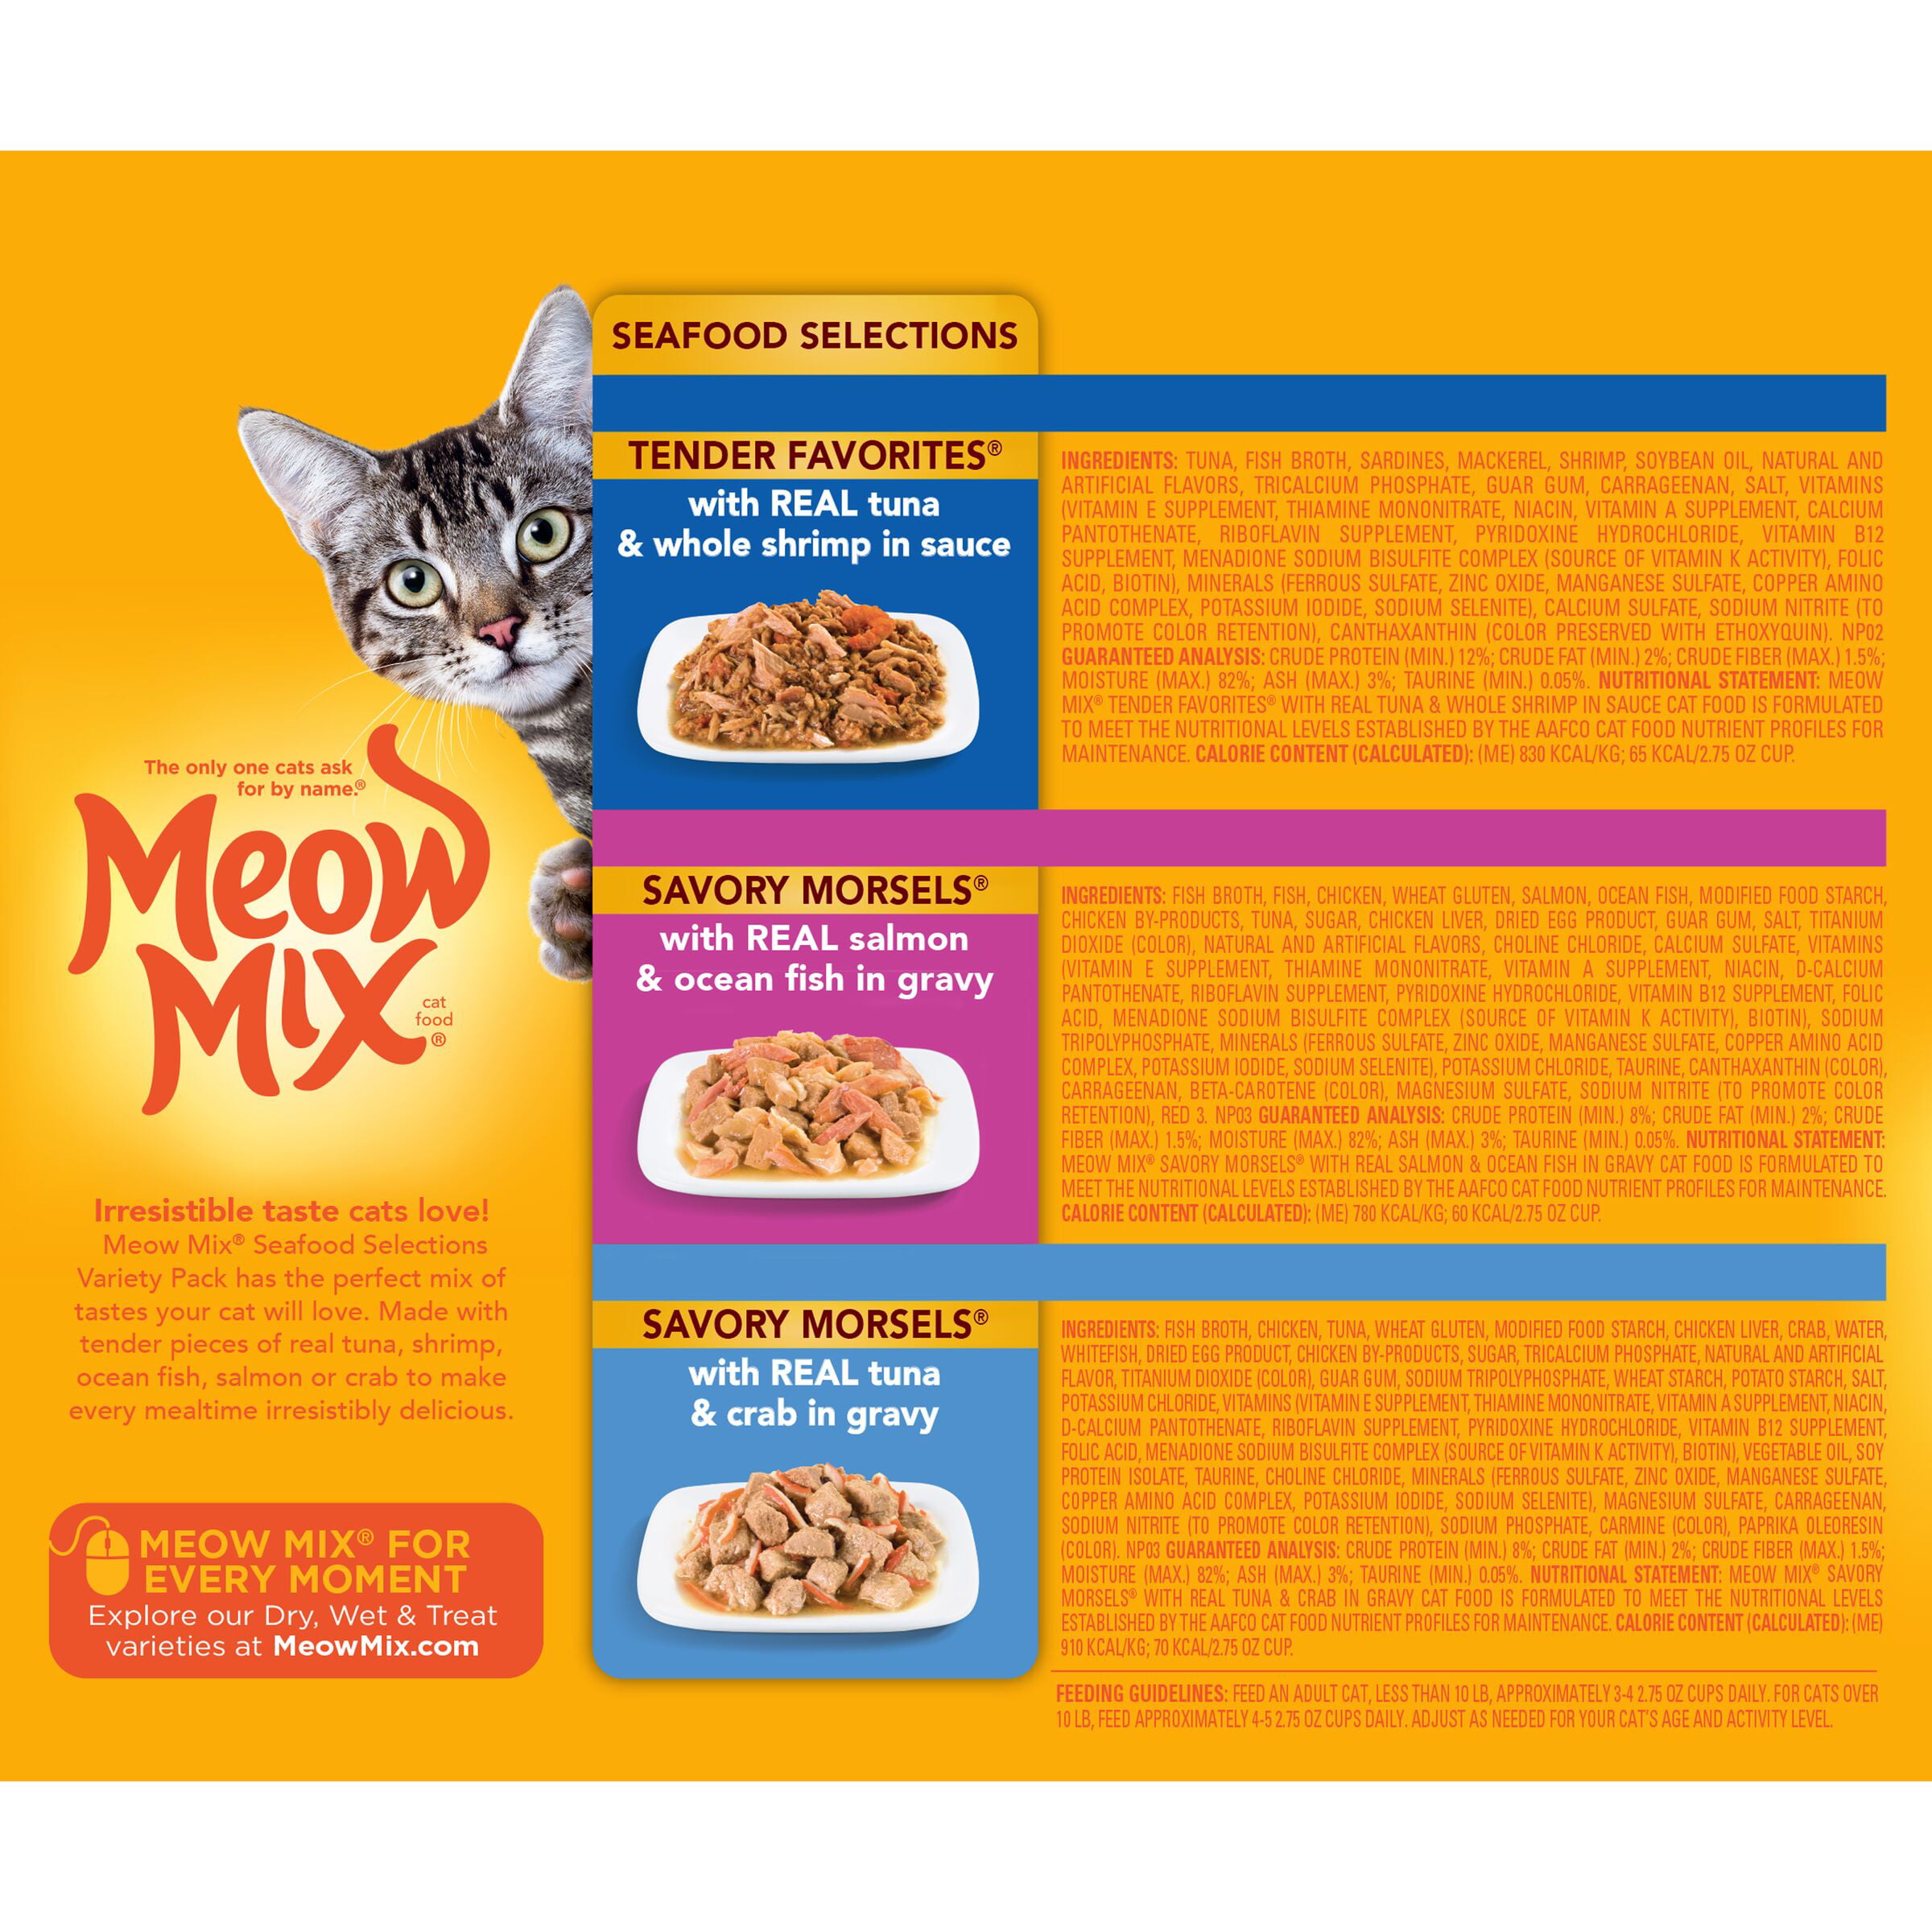 meow mix 24 pack